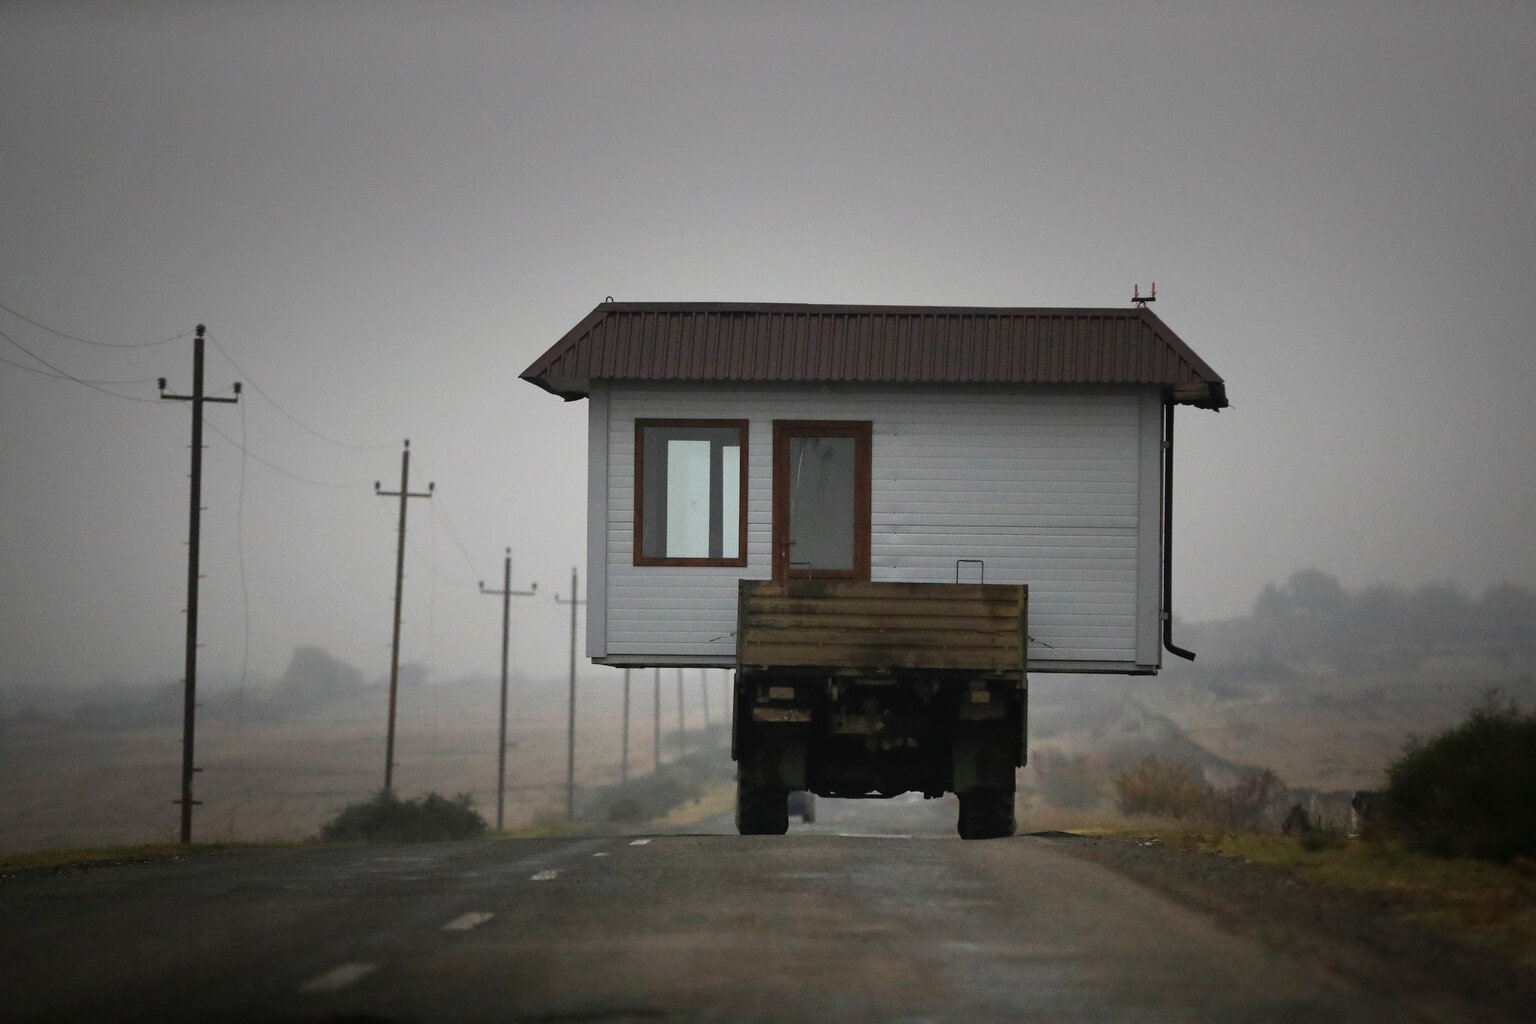  A family drives a truck loaded with a small house along a highway as they leave their home village in the separatist region of Nagorno-Karabakh, Wednesday, Nov. 18, 2020. (AP Photo/Sergei Grits) 